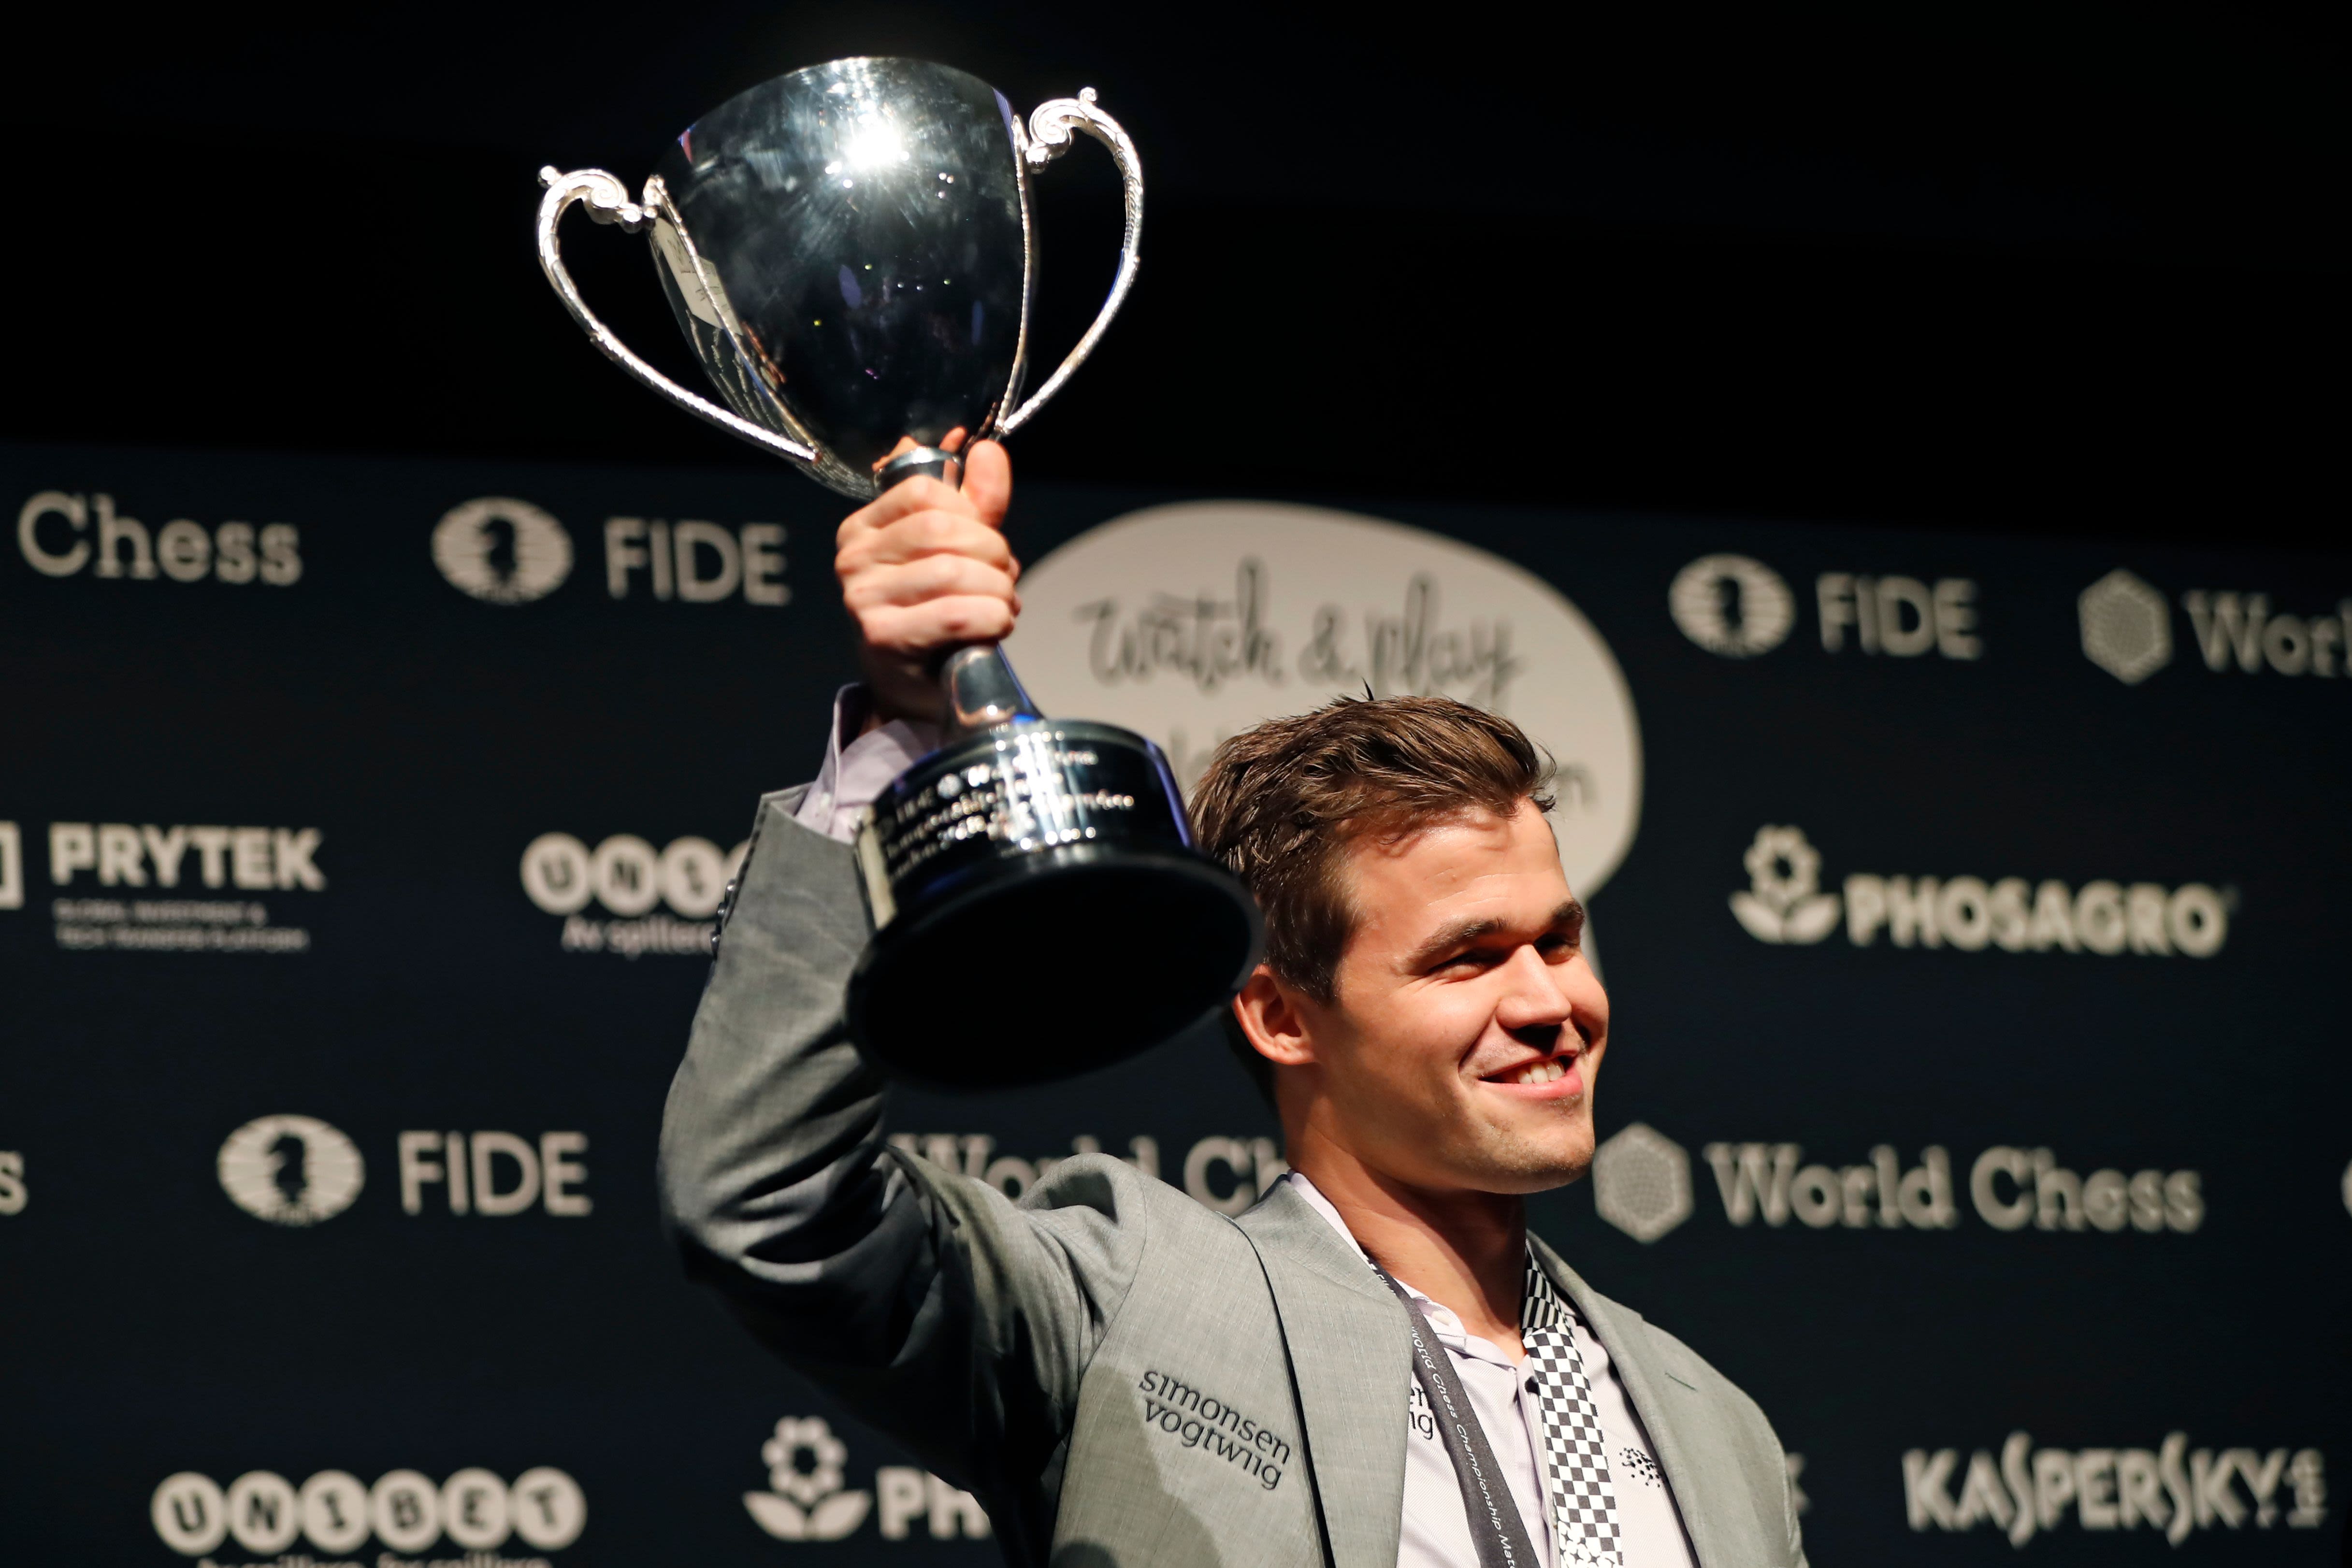 2700chess on X: The Top-20 after #FIDEWorldCup. Congratulations to  @MagnusCarlsen on winning the title! Some tournament rating performances  (TPR): Carlsen 2854 Caruana 2802 Nakamura 2690 Nepomniachtchi 2696 Giri  2593 Gukesh 2797 So